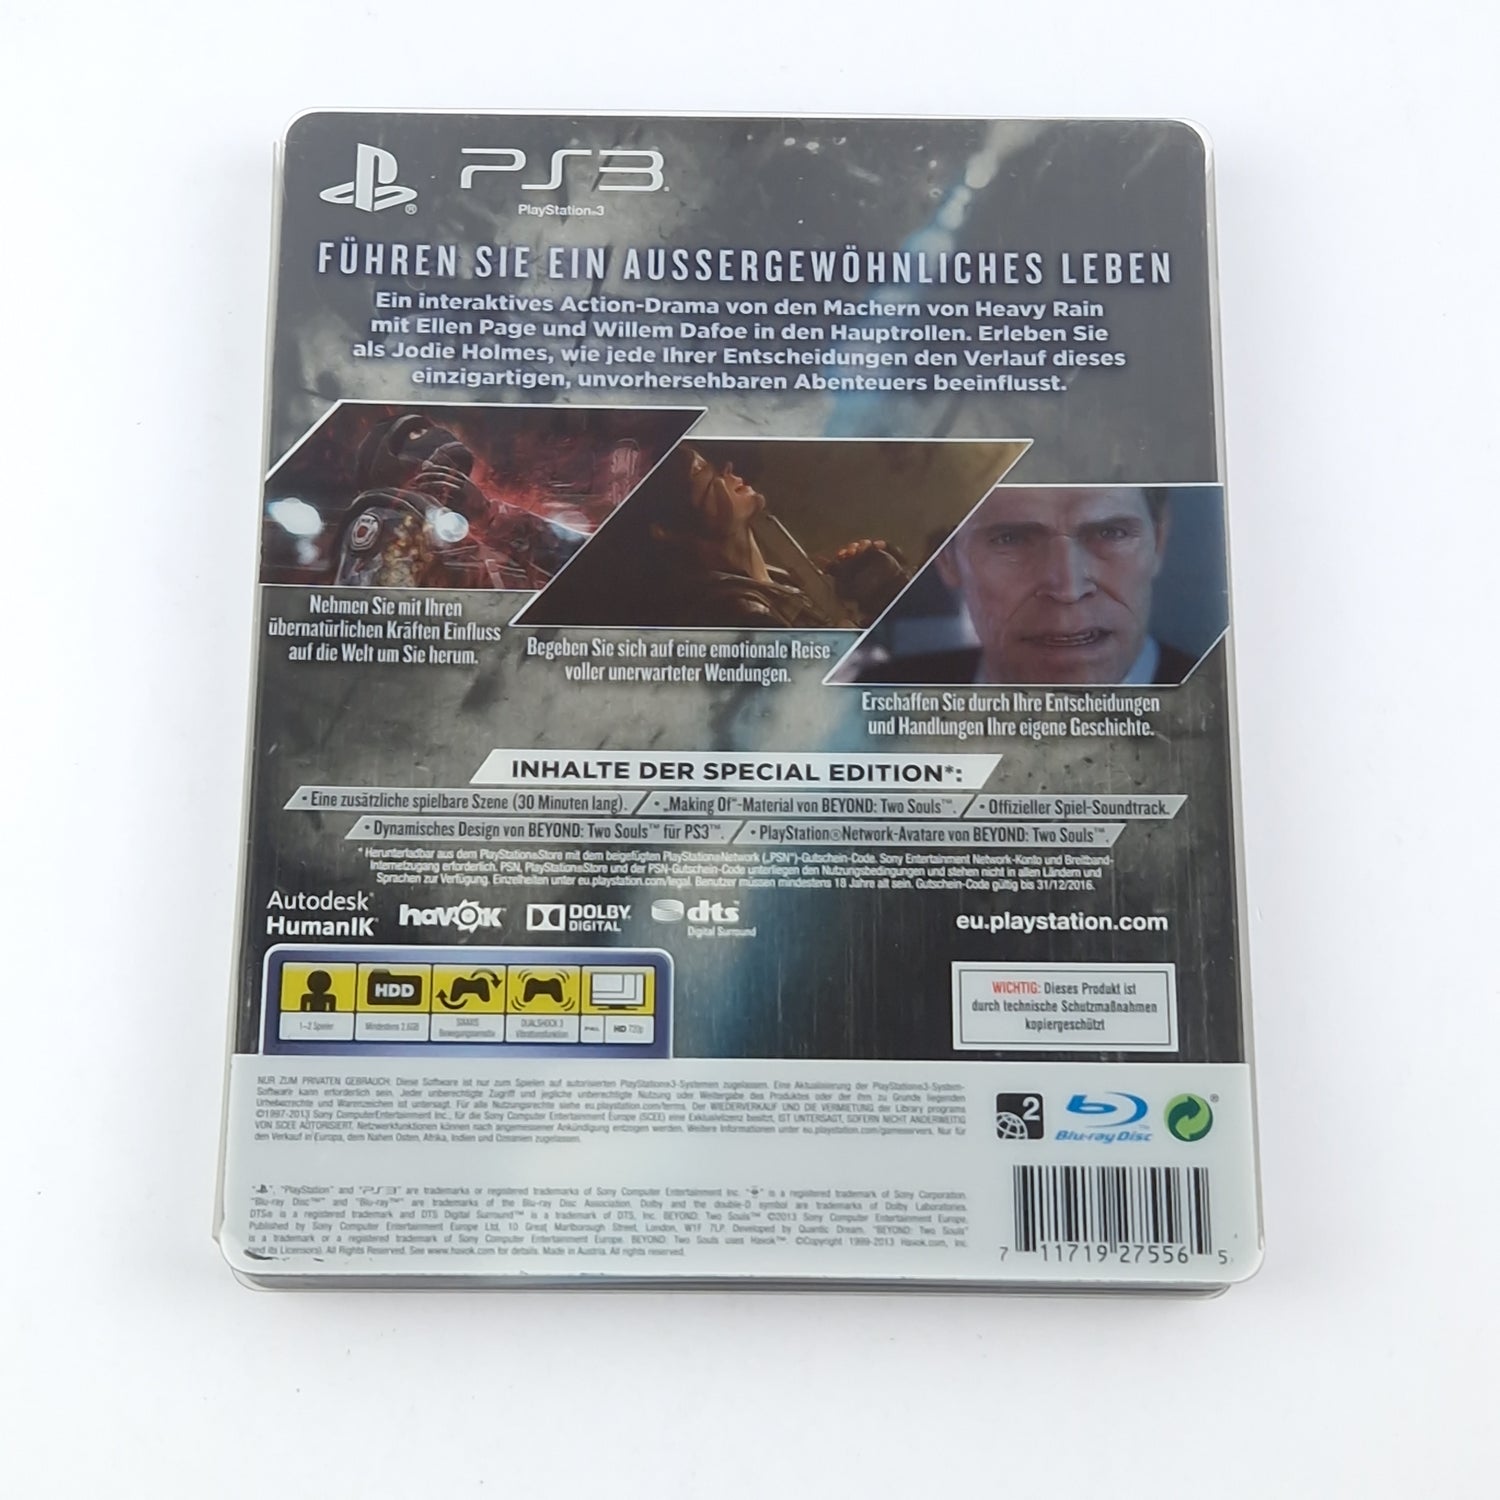 Playstation 3 game: Beyond Two Souls Special Edition - OVP SONY PS3